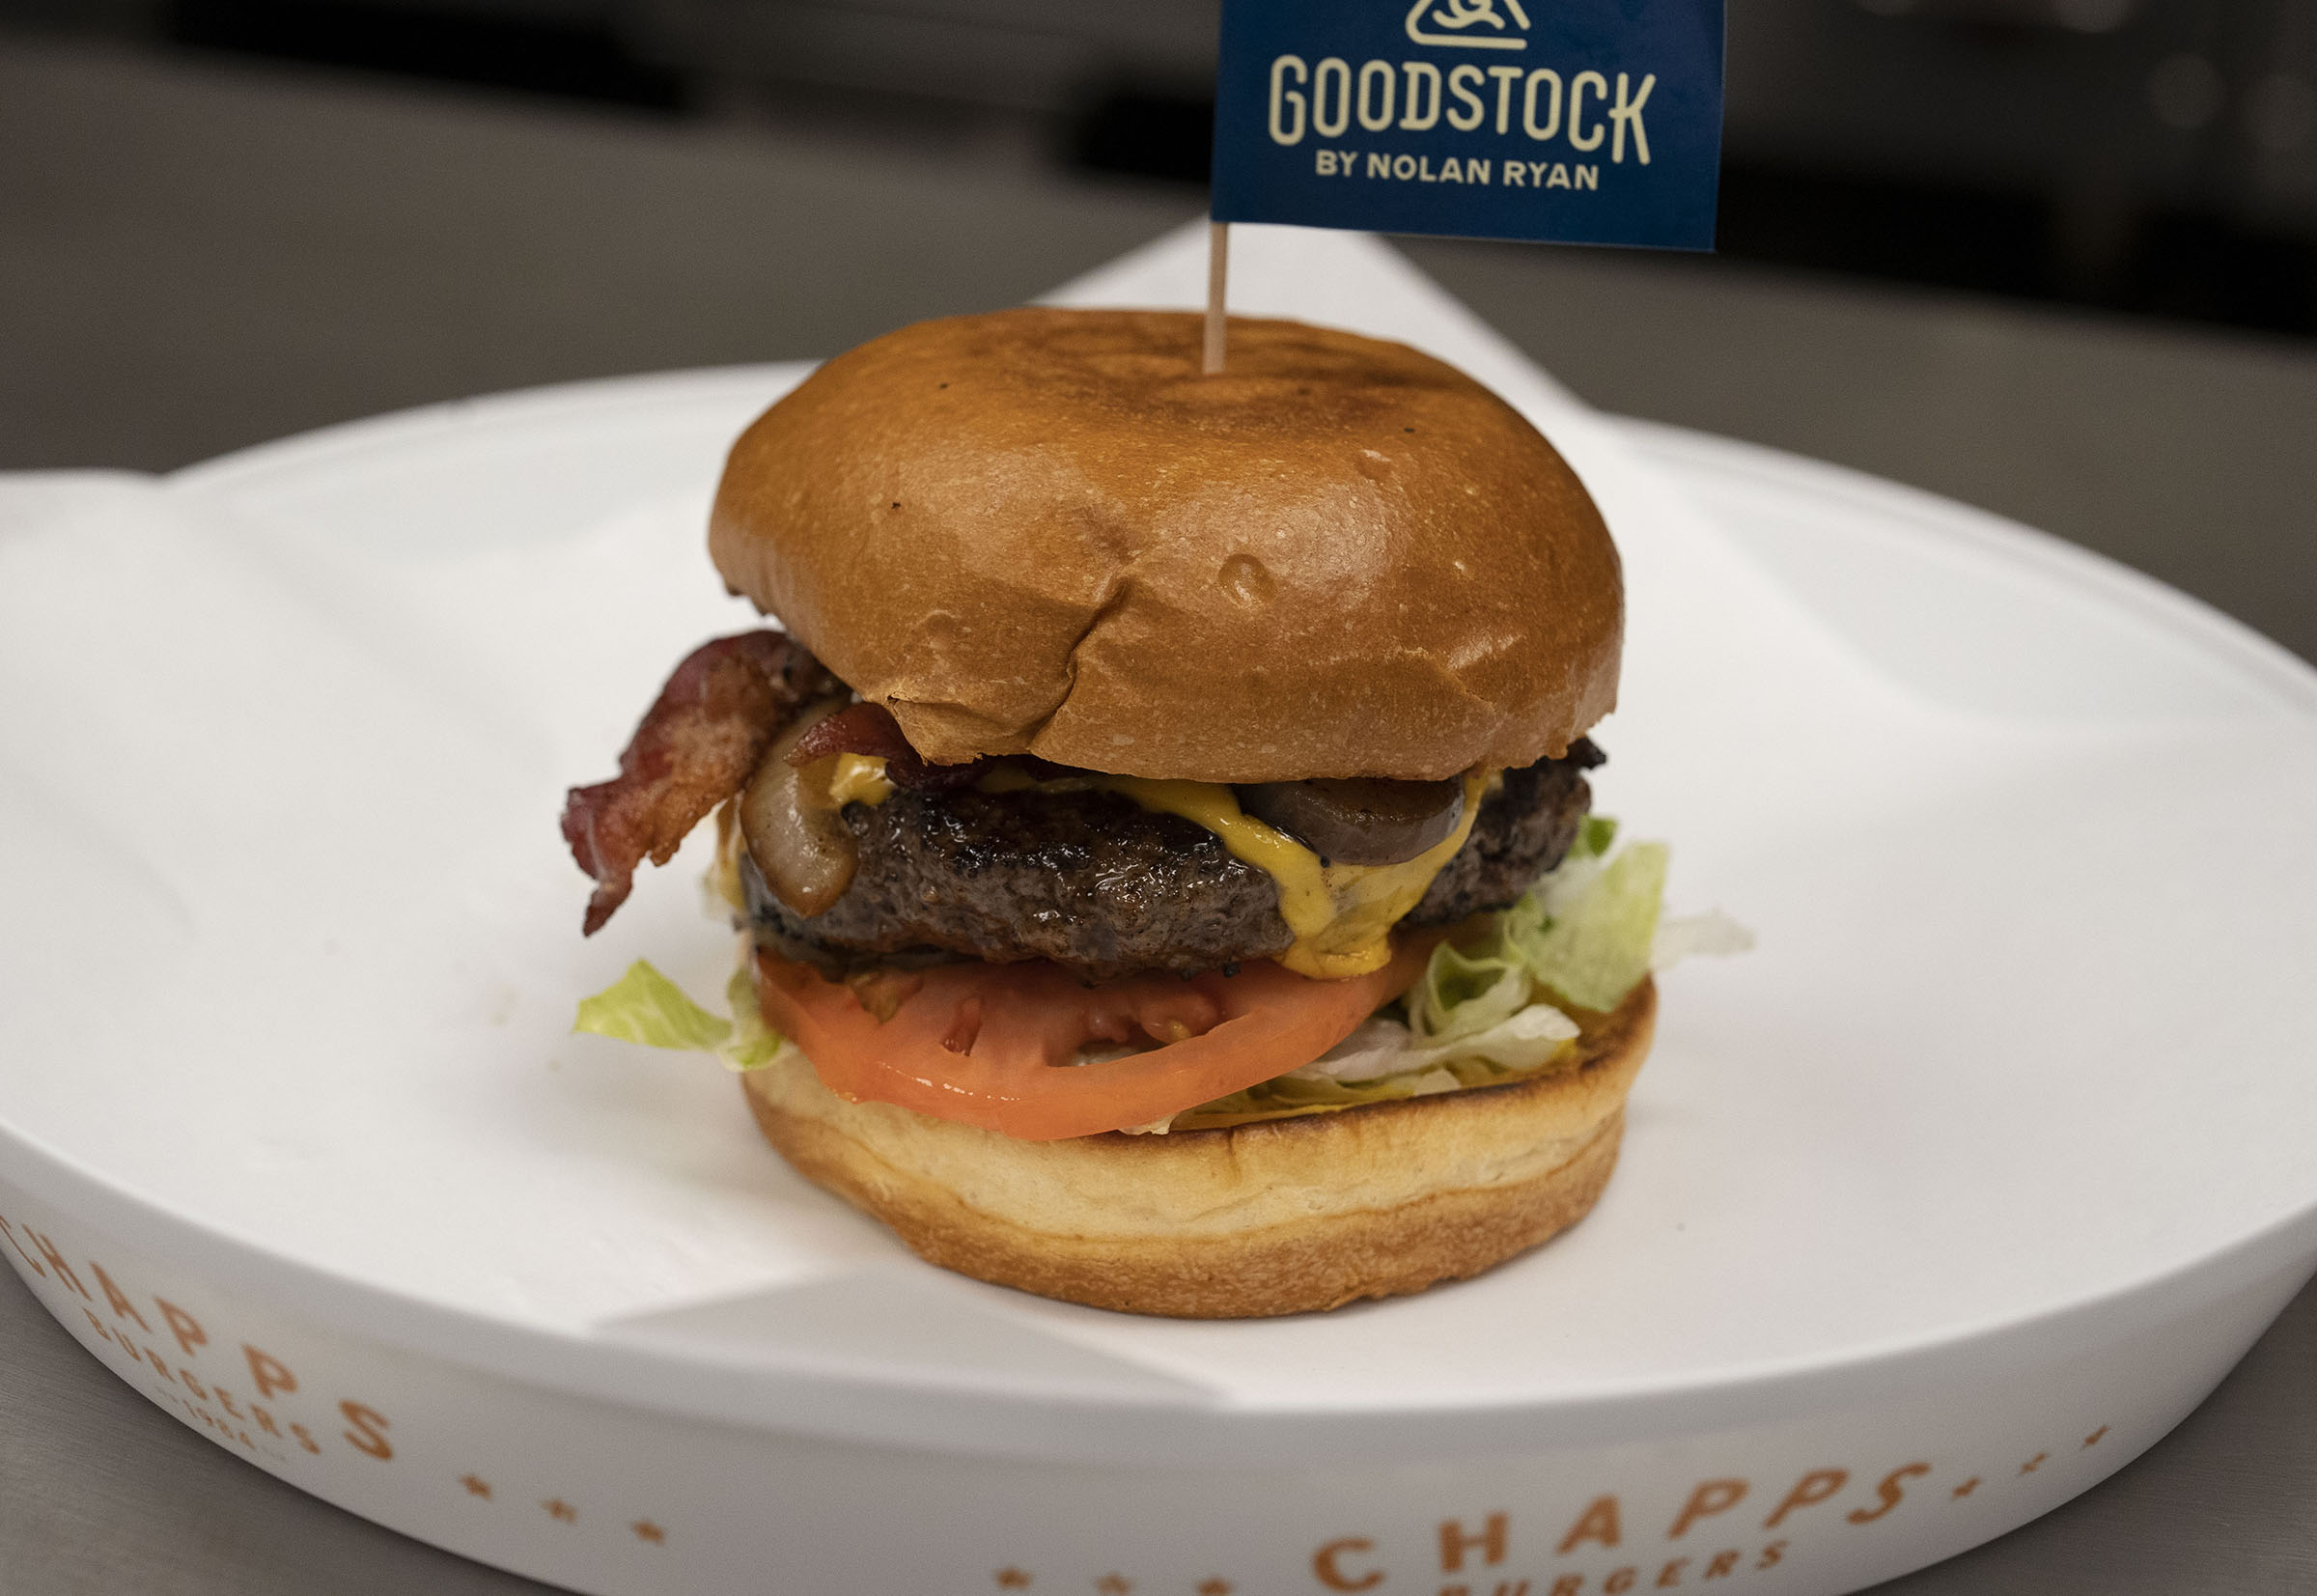 A burger with a toasted brown bun sitting on a white plate. The burger has a small blue flag sticking out of the top reading "Goodstock"